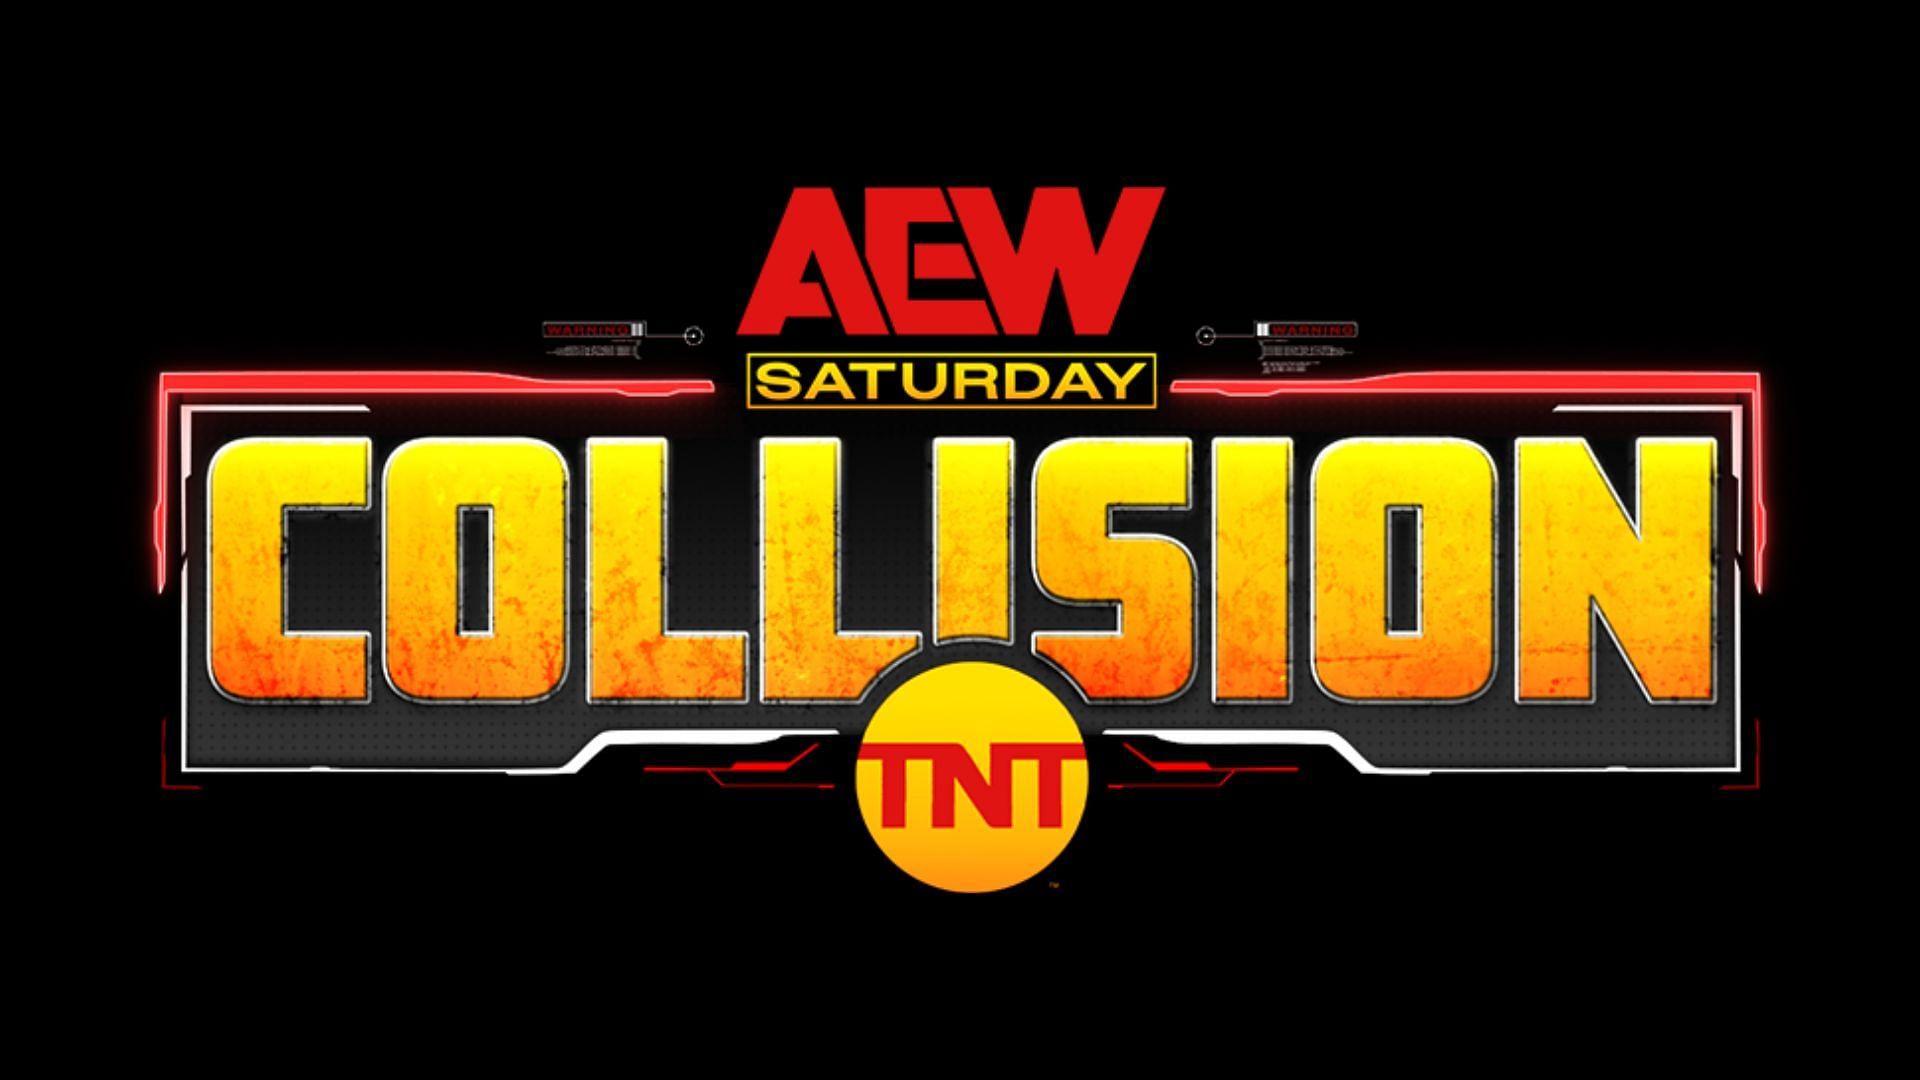 AEW Collision is the Saturday show of All Elite Wrestling